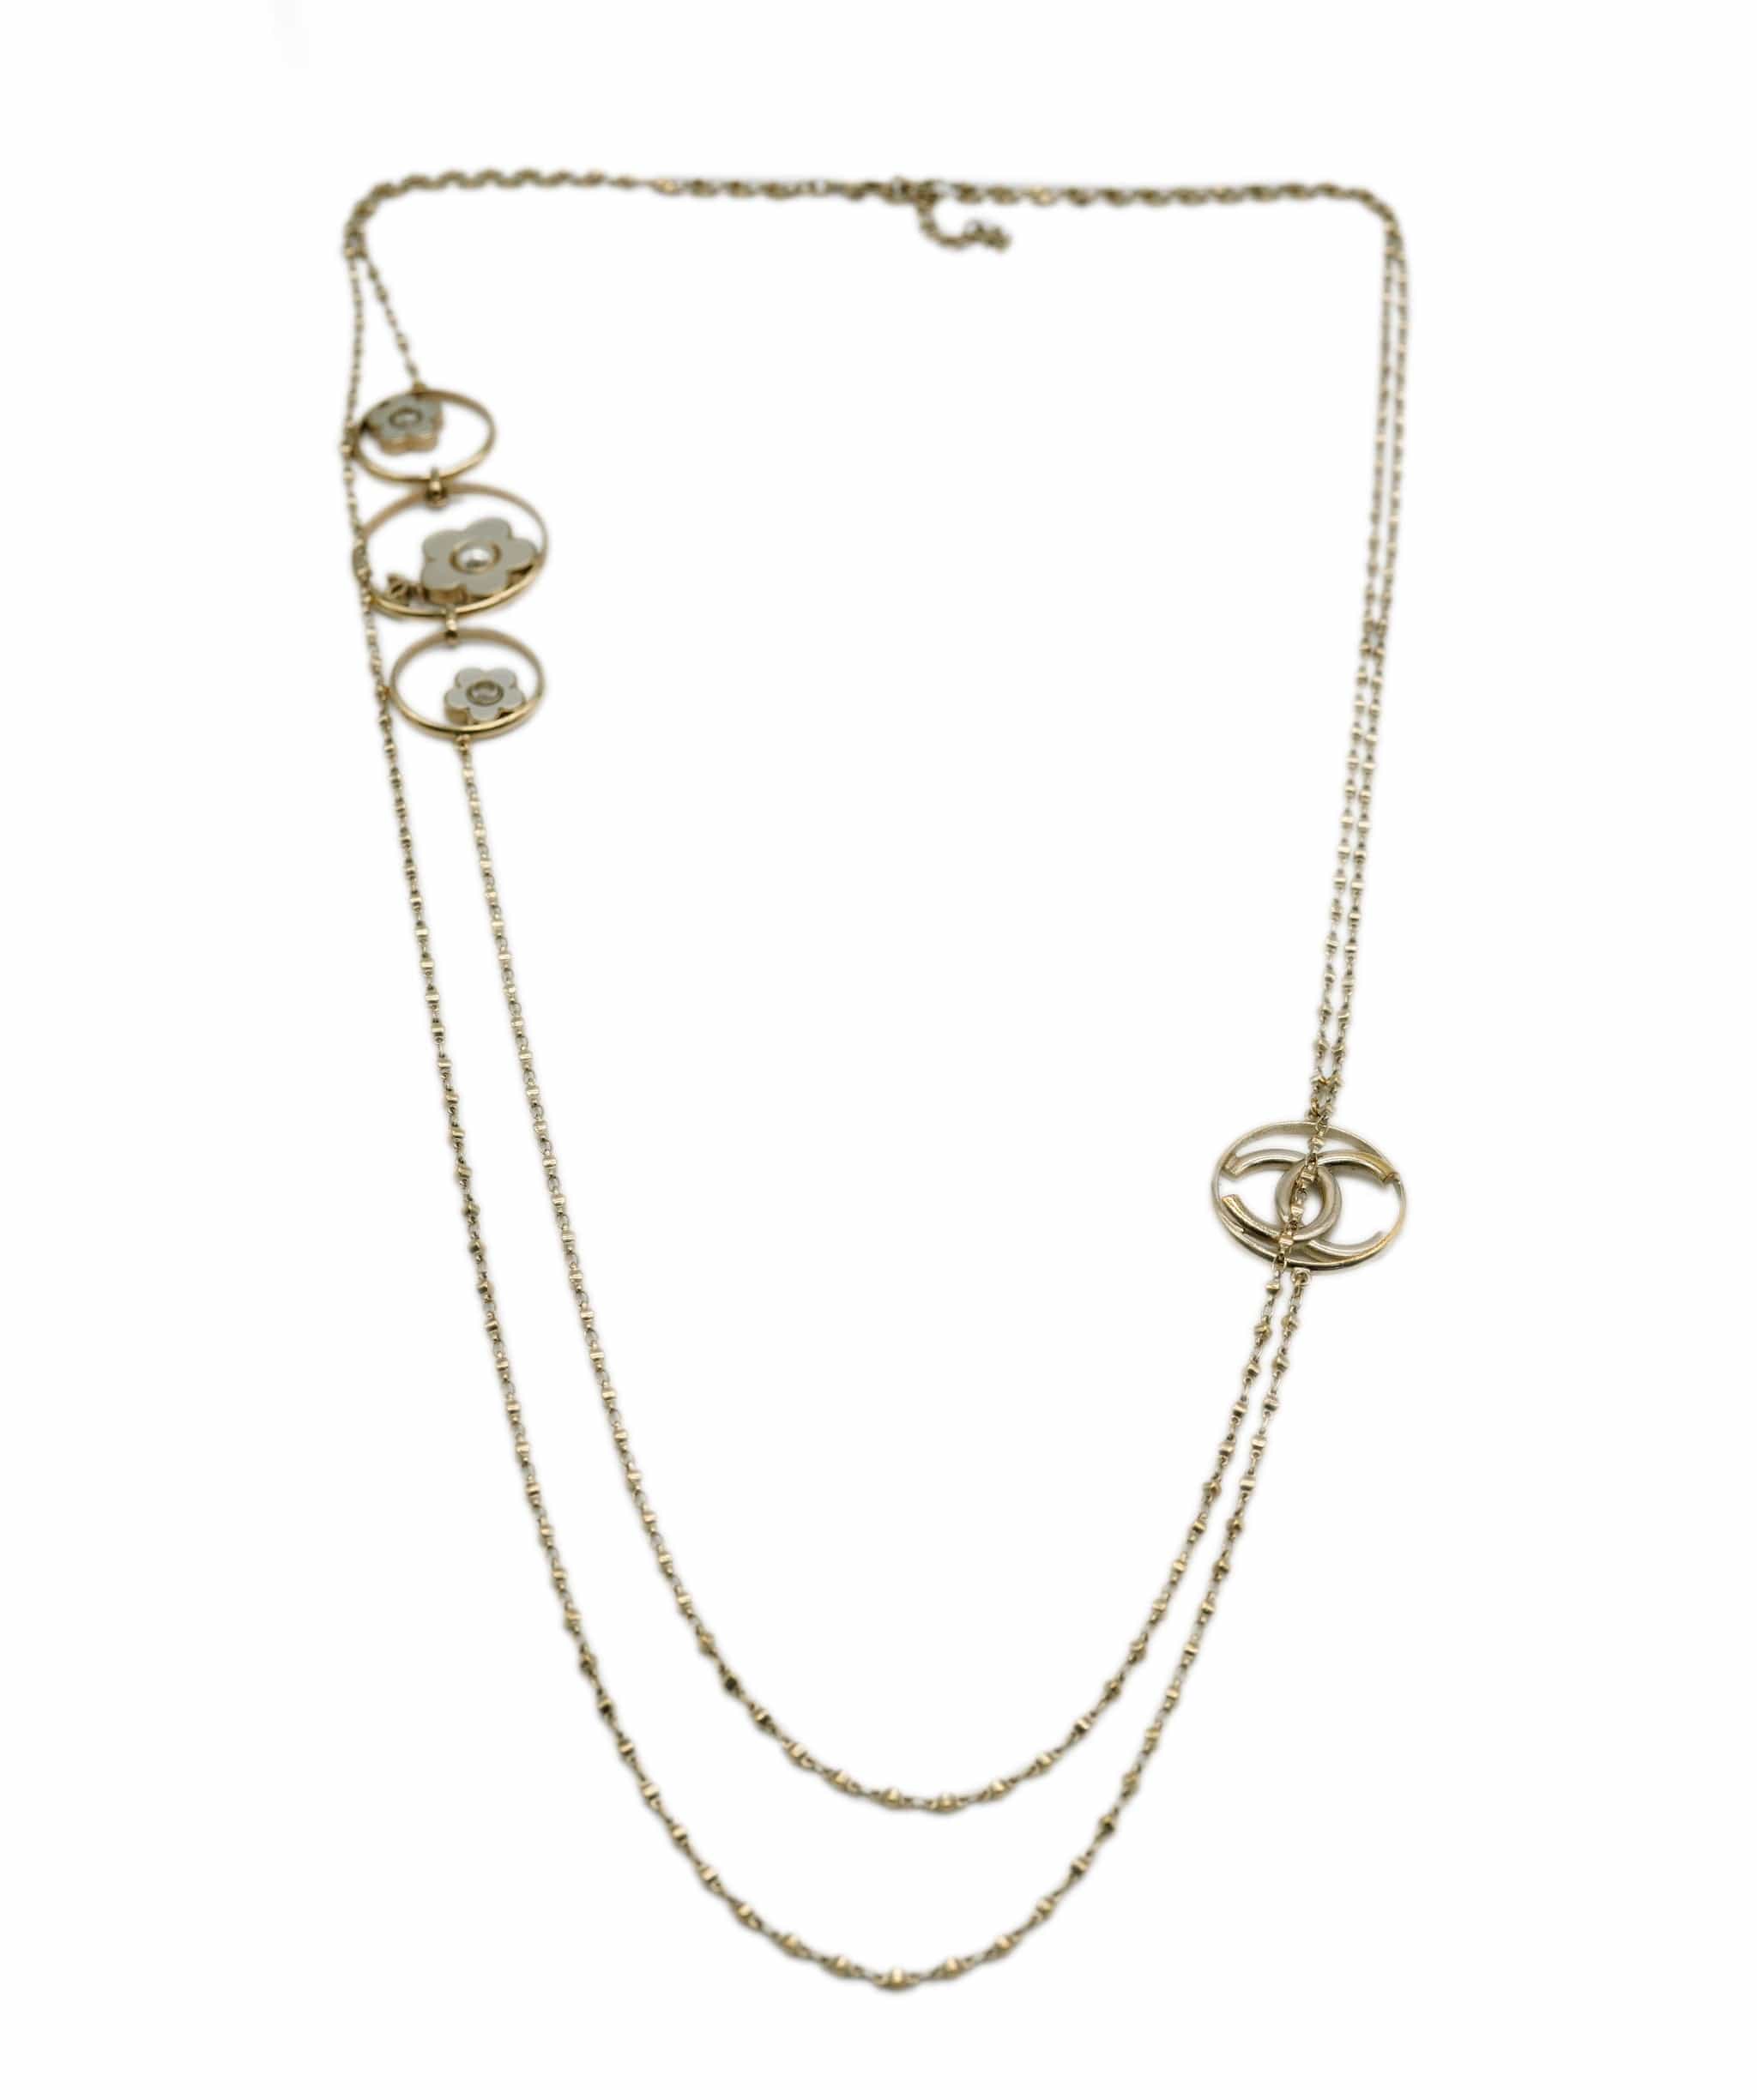 Chanel Chanel long daisy necklace, with dust case - AEC1057